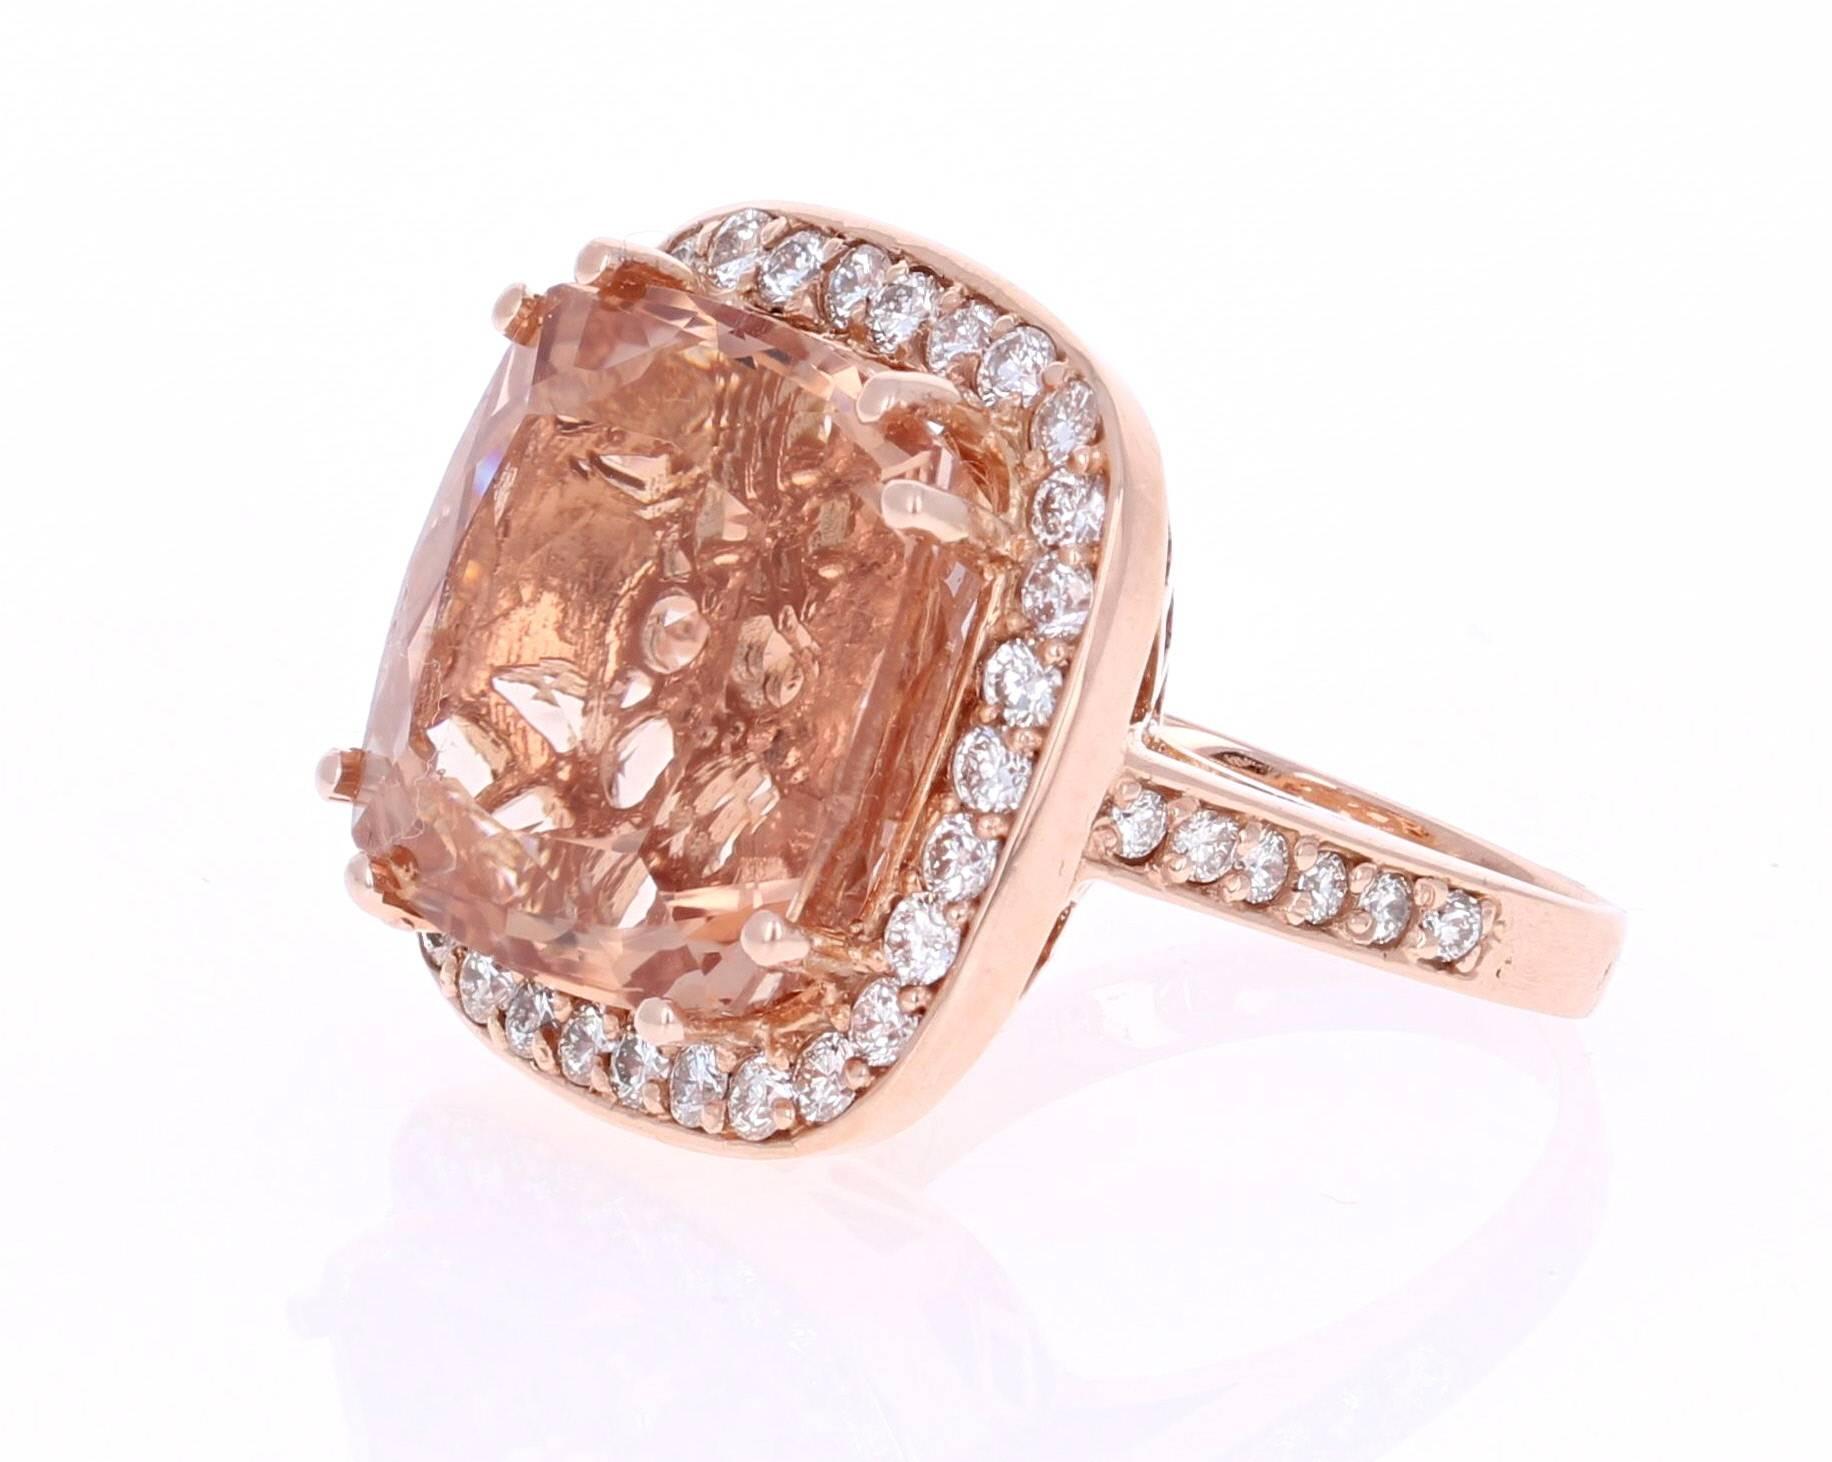 This beautiful Morganite Ring has a gorgeous and large 19.01 carat Morganite as its center stone and is surrounded by 42 Round Cut Diamonds that weigh 1.22 carats (Clarity: VS2, Color: H).  The total carat weight of the ring is 20.23 carats.

It is